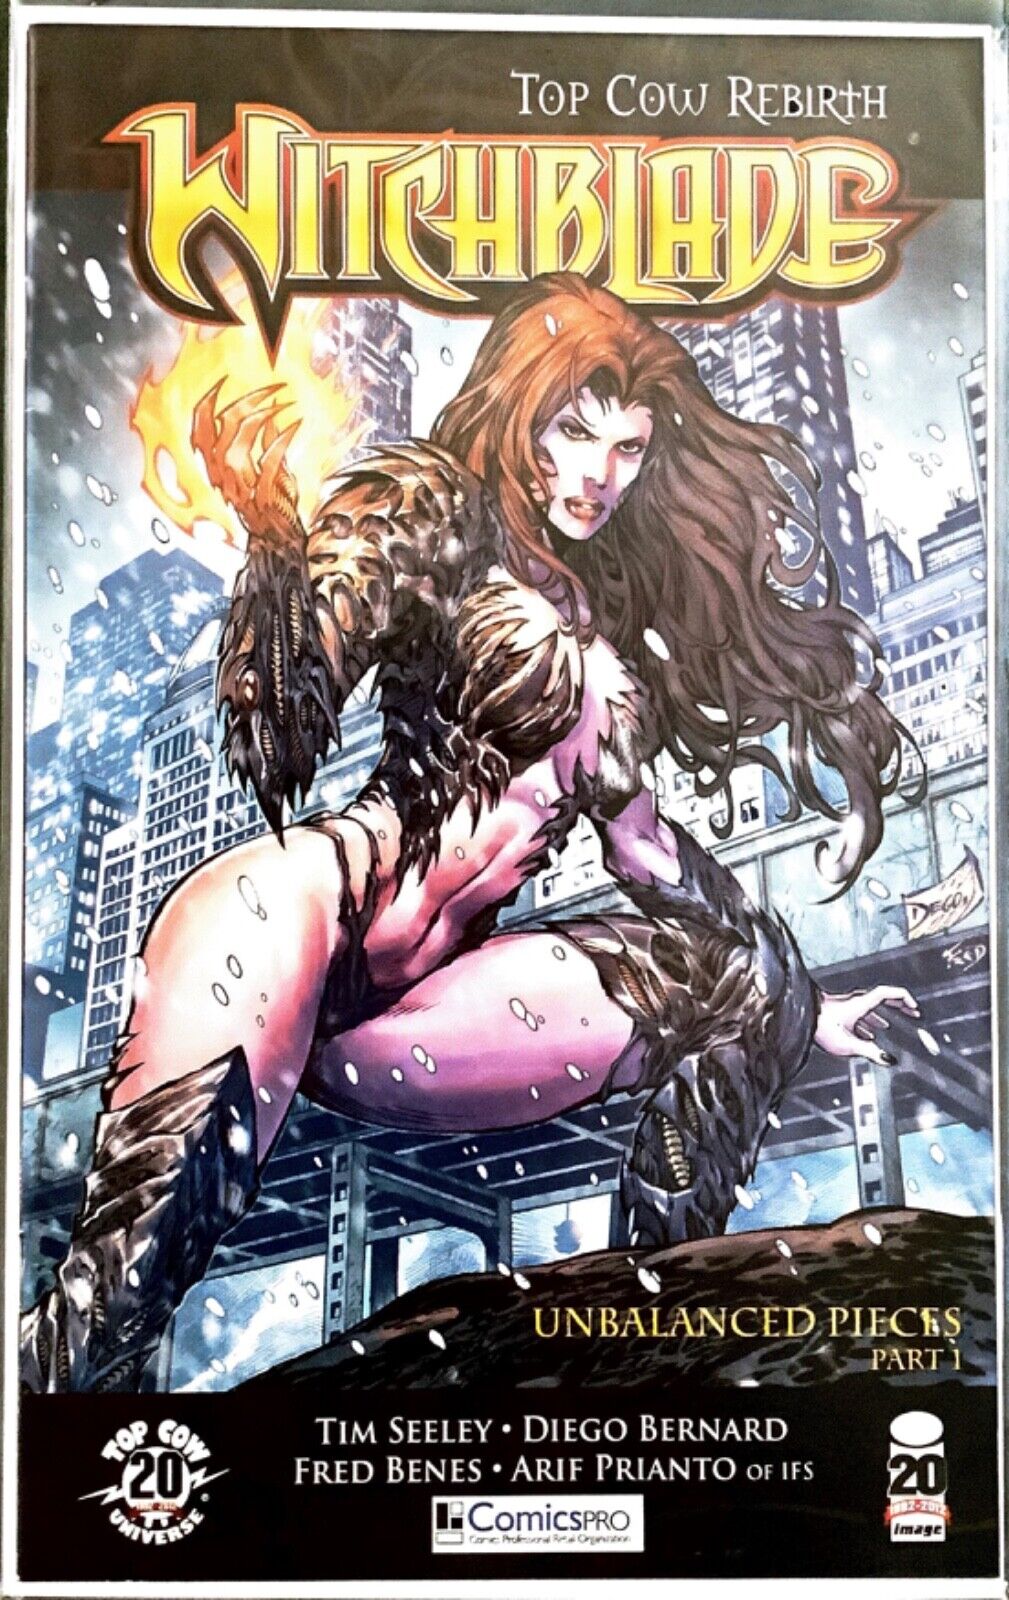 WITCHBLADE #151 COMICS PRO VARIANT COVER NEAR MINT BUY IT NOW